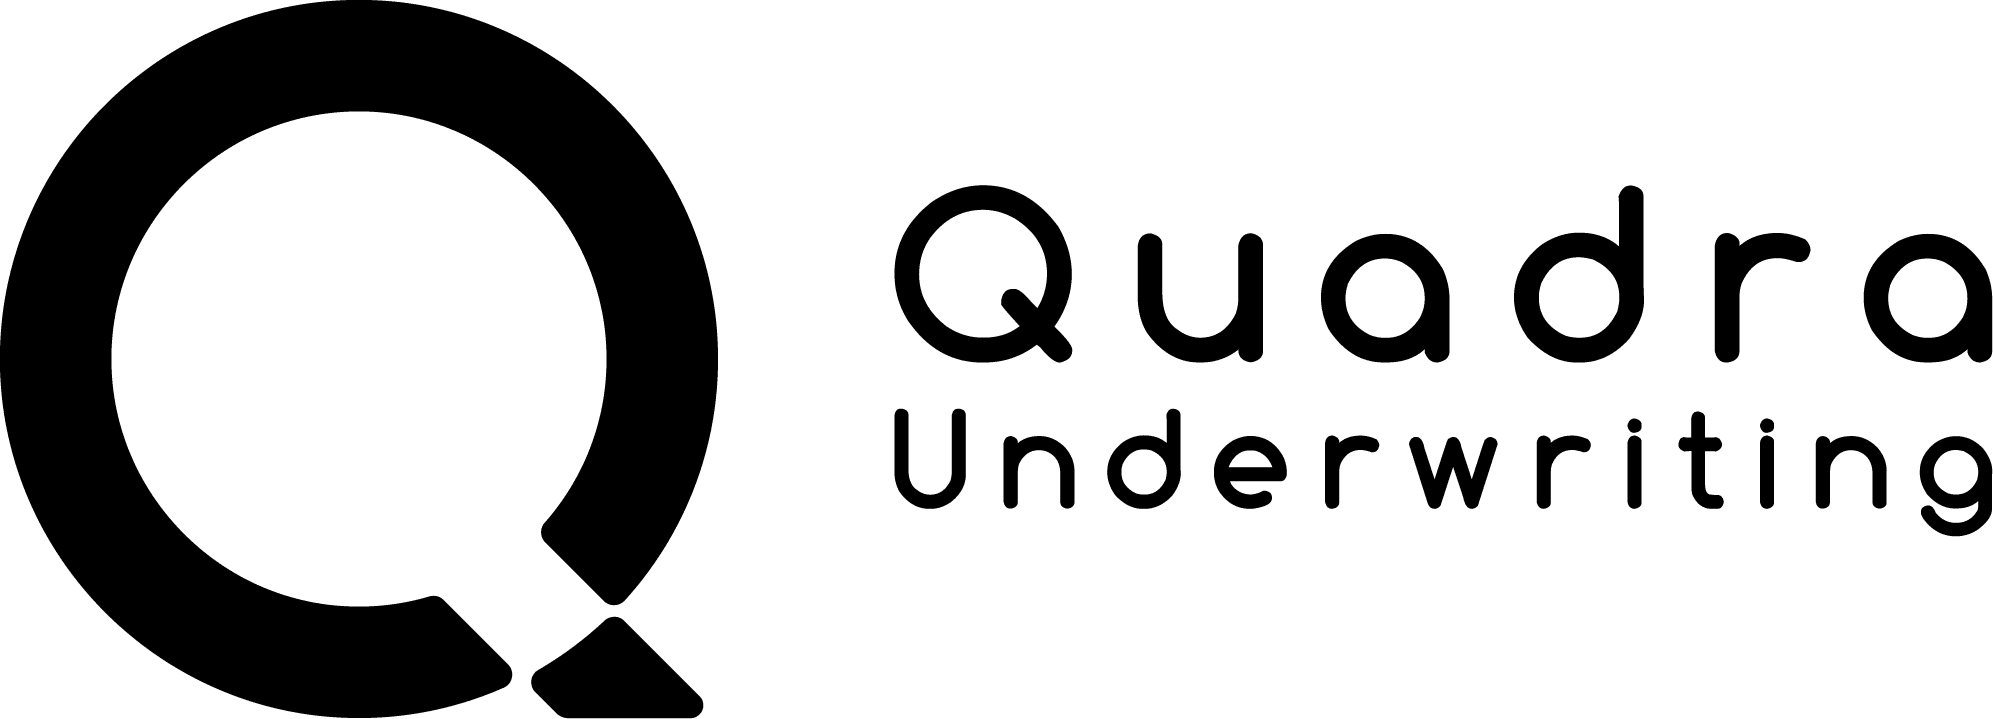 Quadra Underwriting, Title Insurance, Warranties and Indemnities, D&O